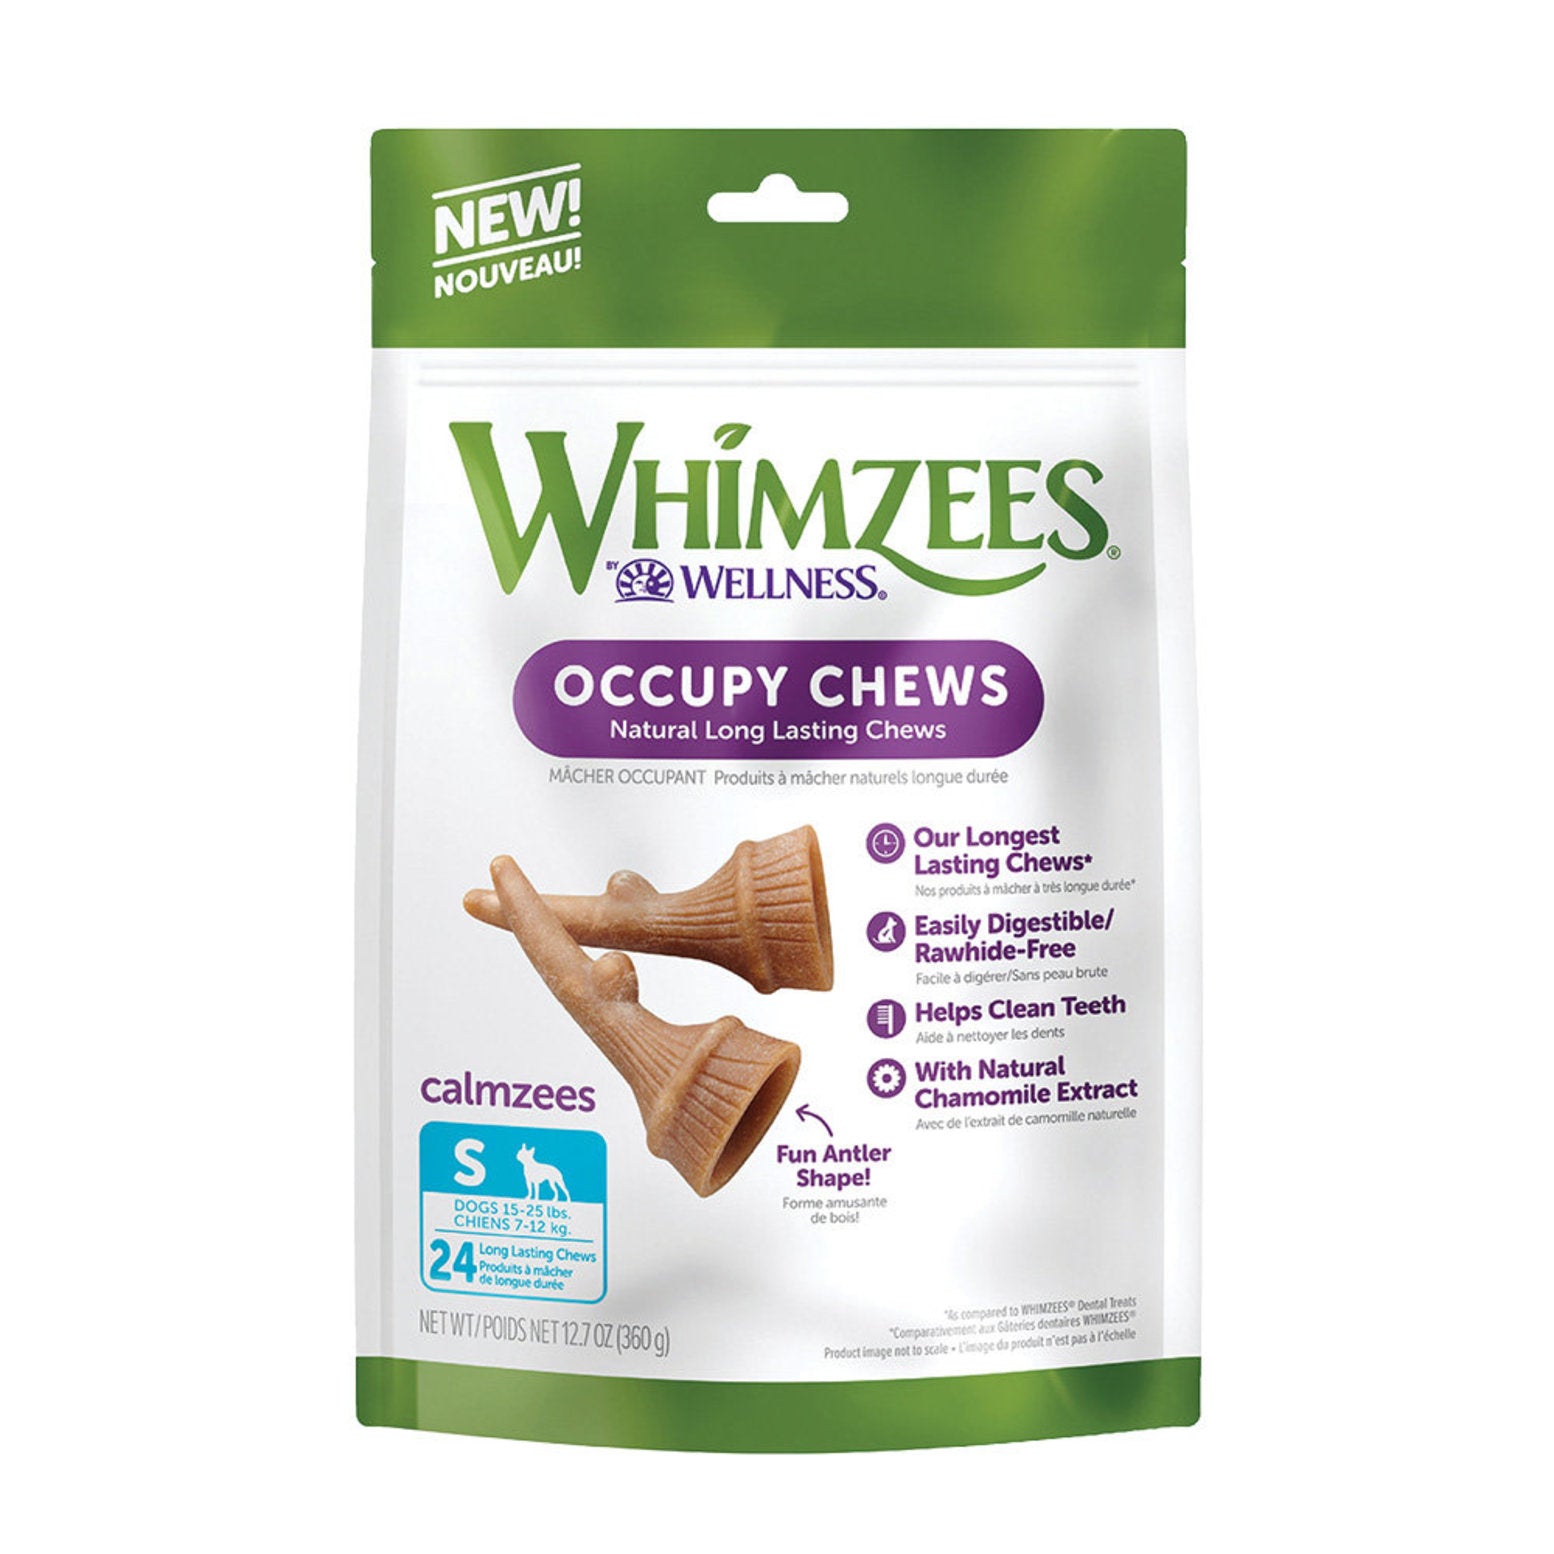 Whimzees Natural Long Lasting Occupy Chews for Dogs (360g)